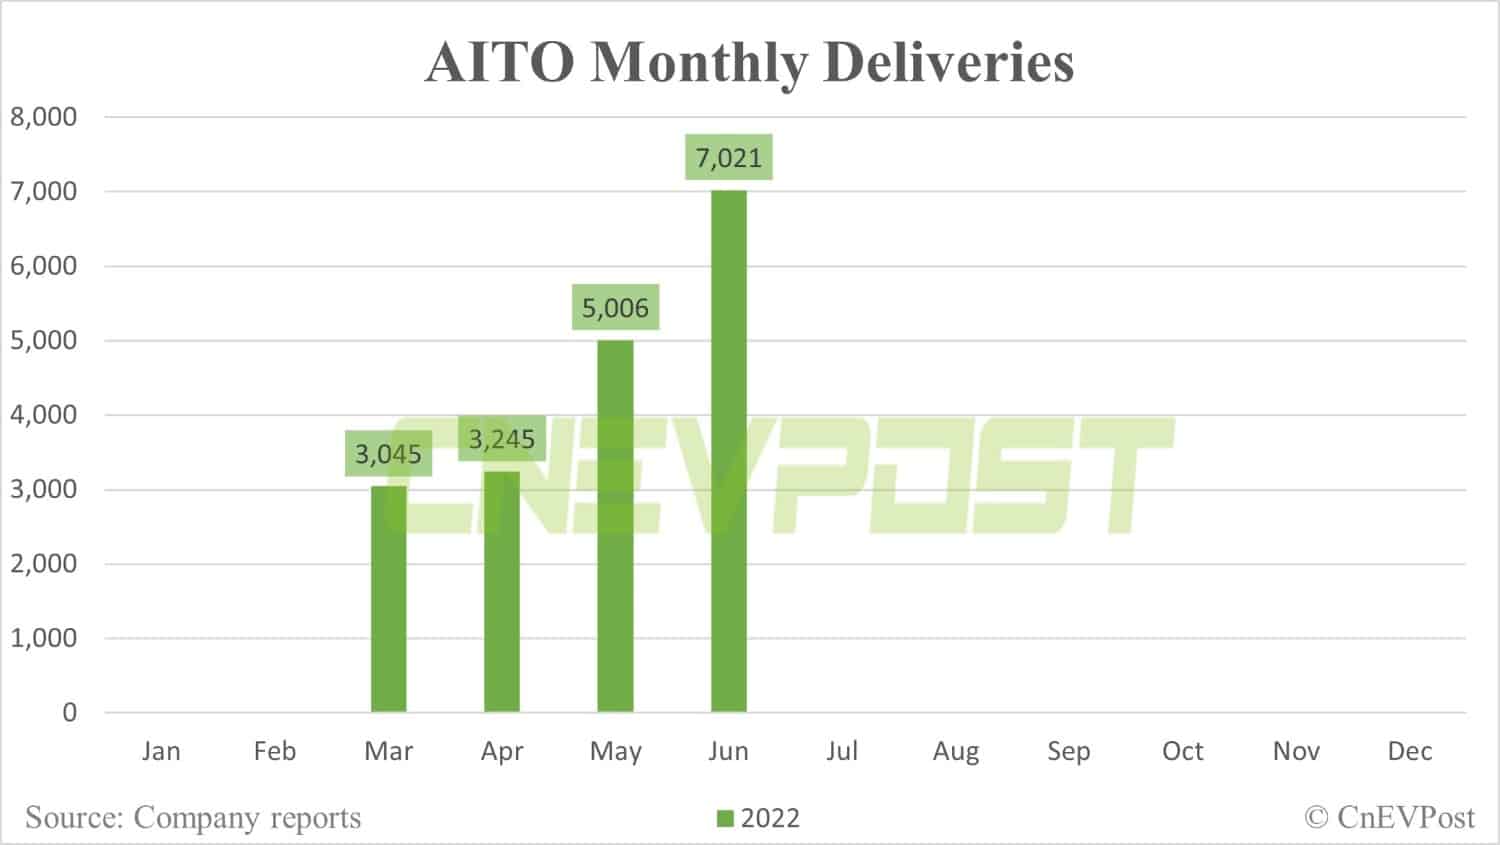 Huawei-backed AITO delivers 7,021 units in June, up 40% from May-CnEVPost